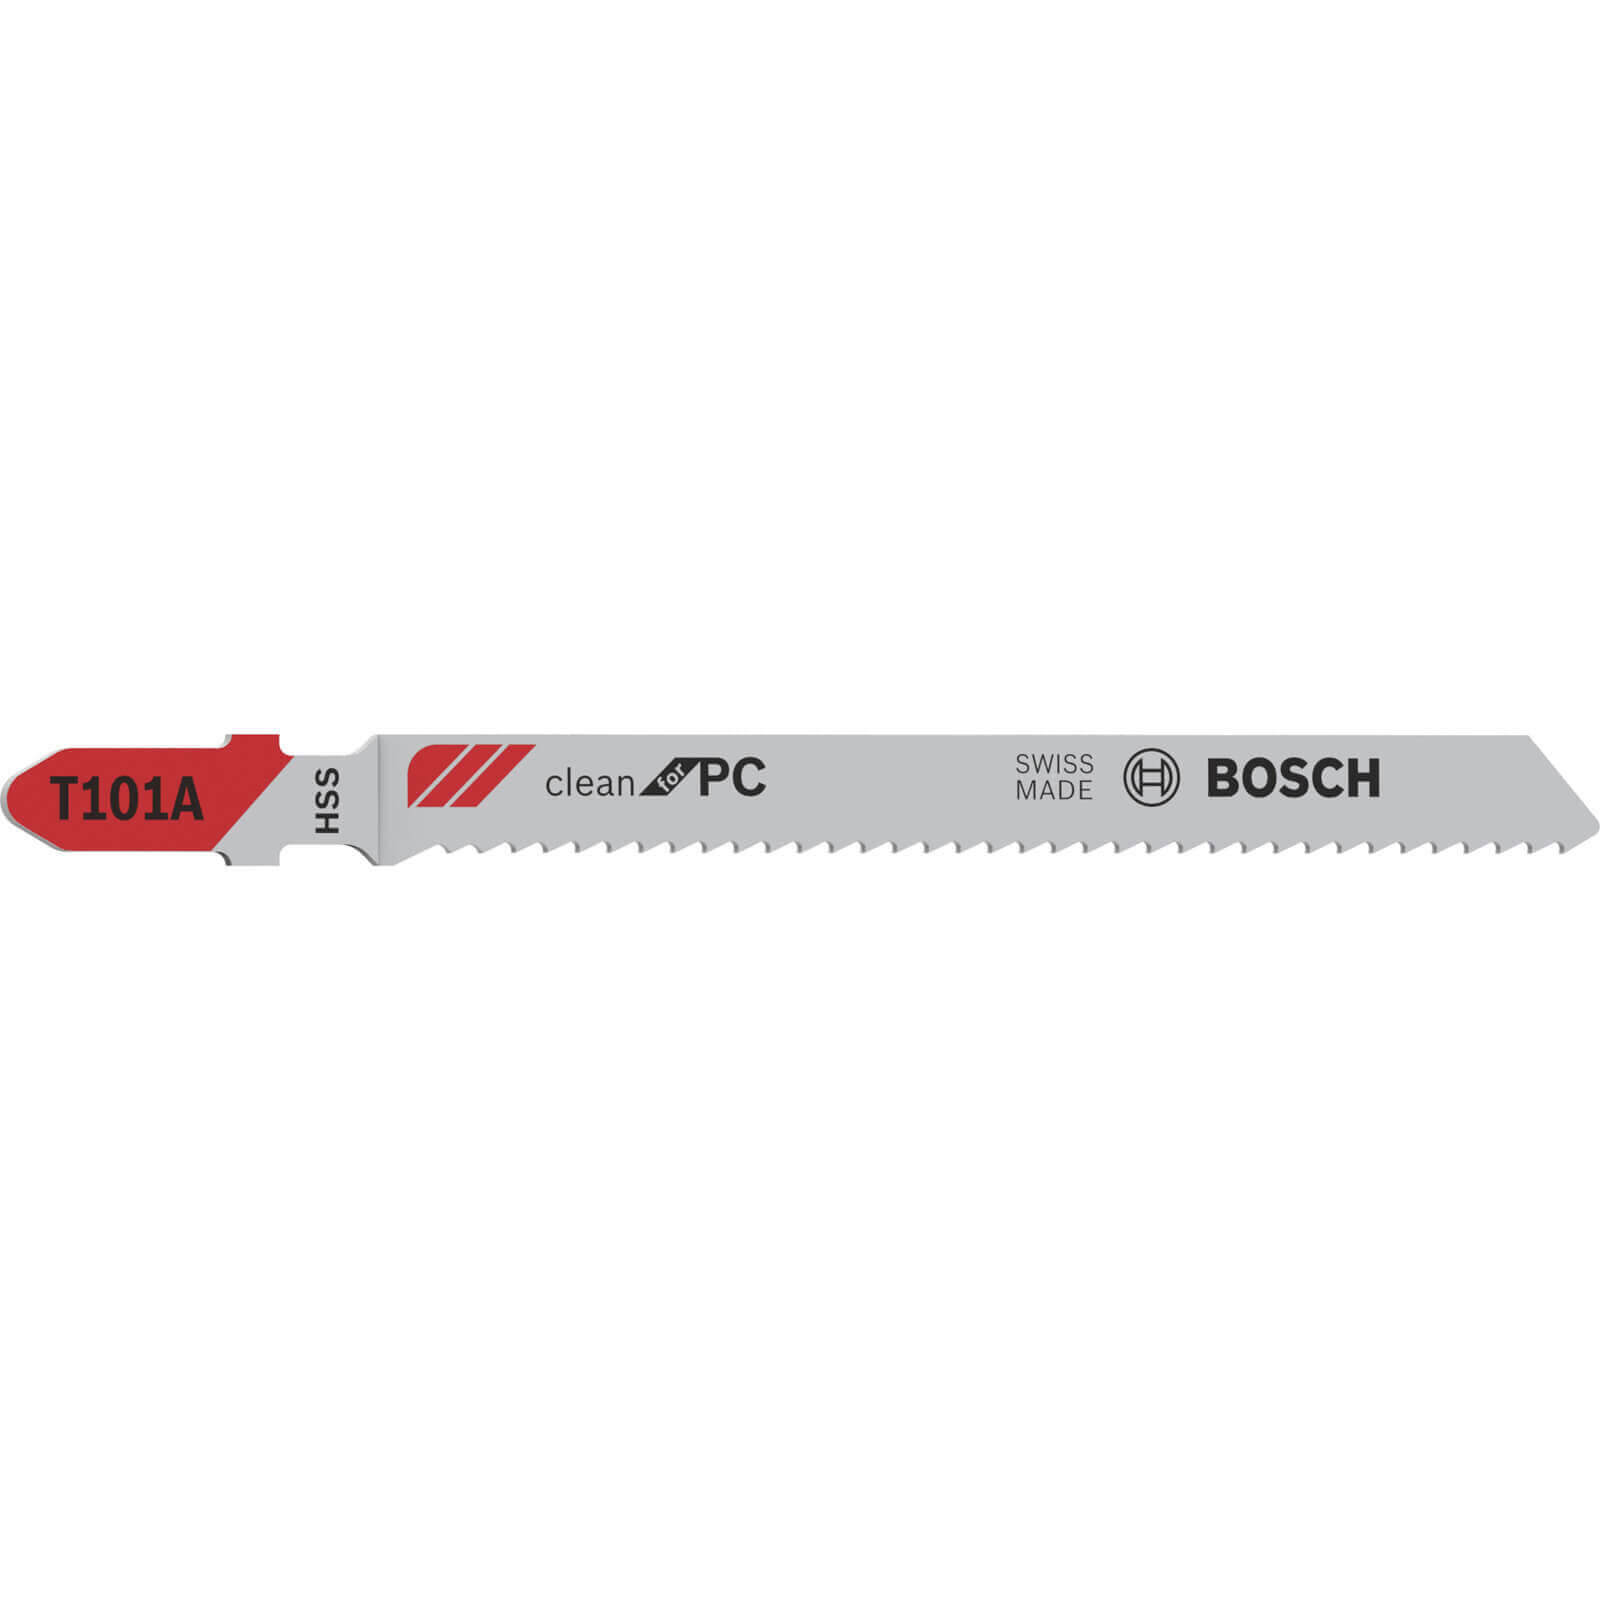 Image of Bosch T 101 A Acrylic and Plastic Cutting Jigsaw Blades Pack of 5